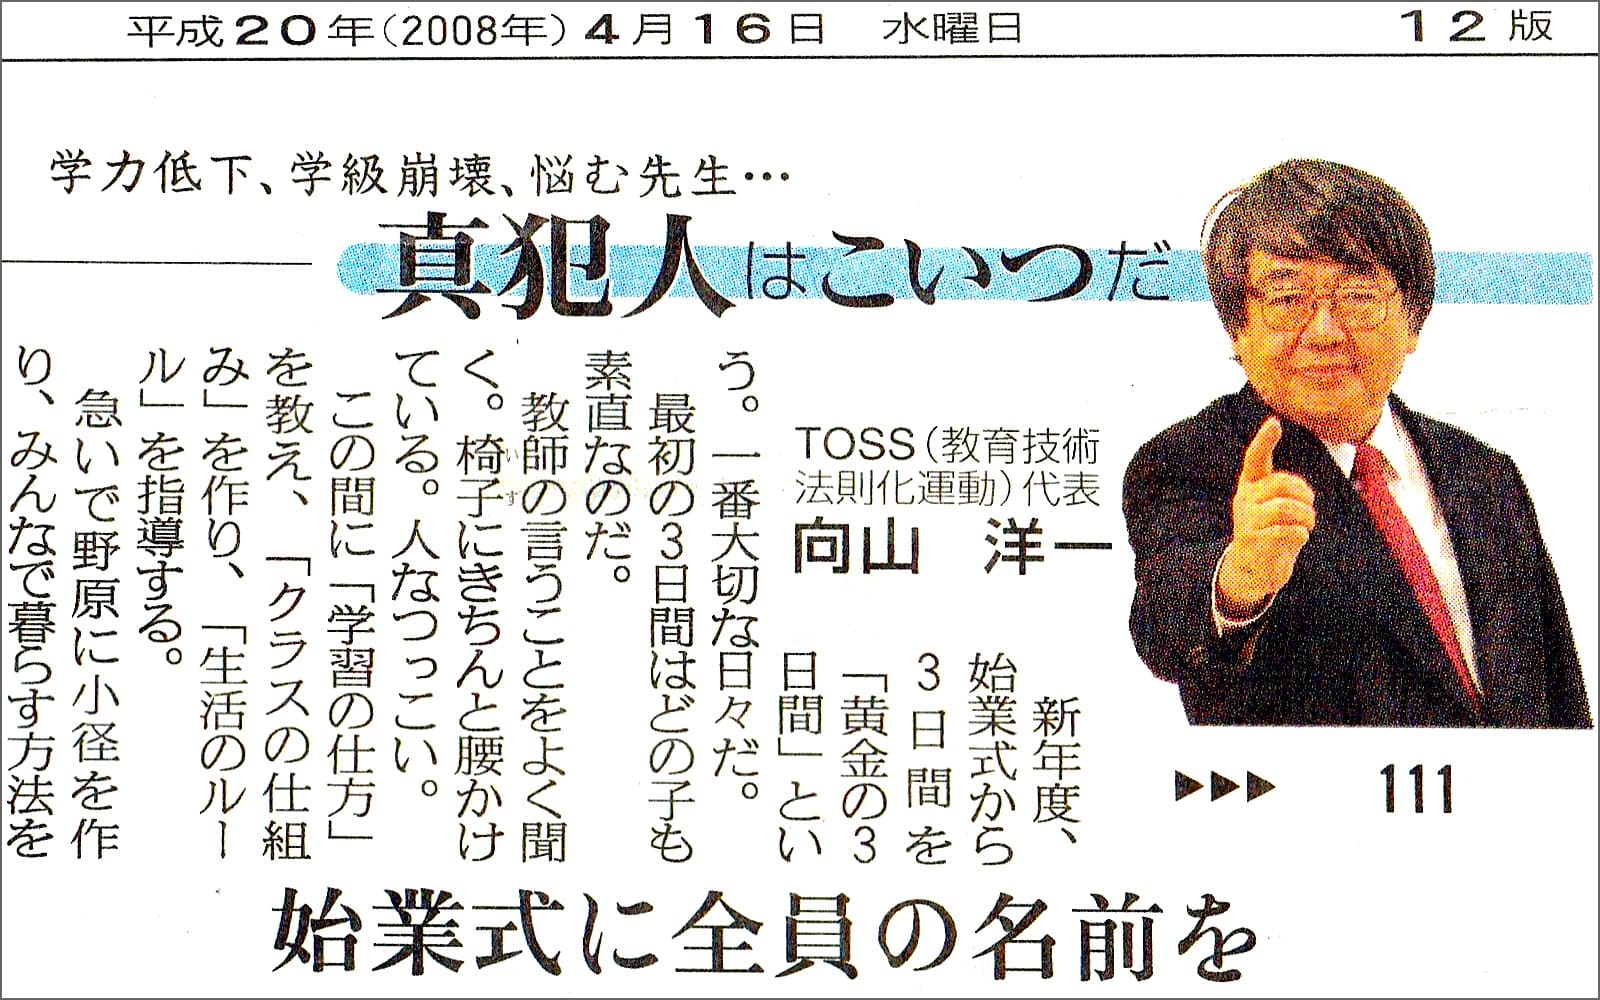 Several new educational terms proposed by Mr. Mukoyama, such as “The Golden Three Days,”have become commonly used in Japanese media. (The Sankei Shimbun 2008)